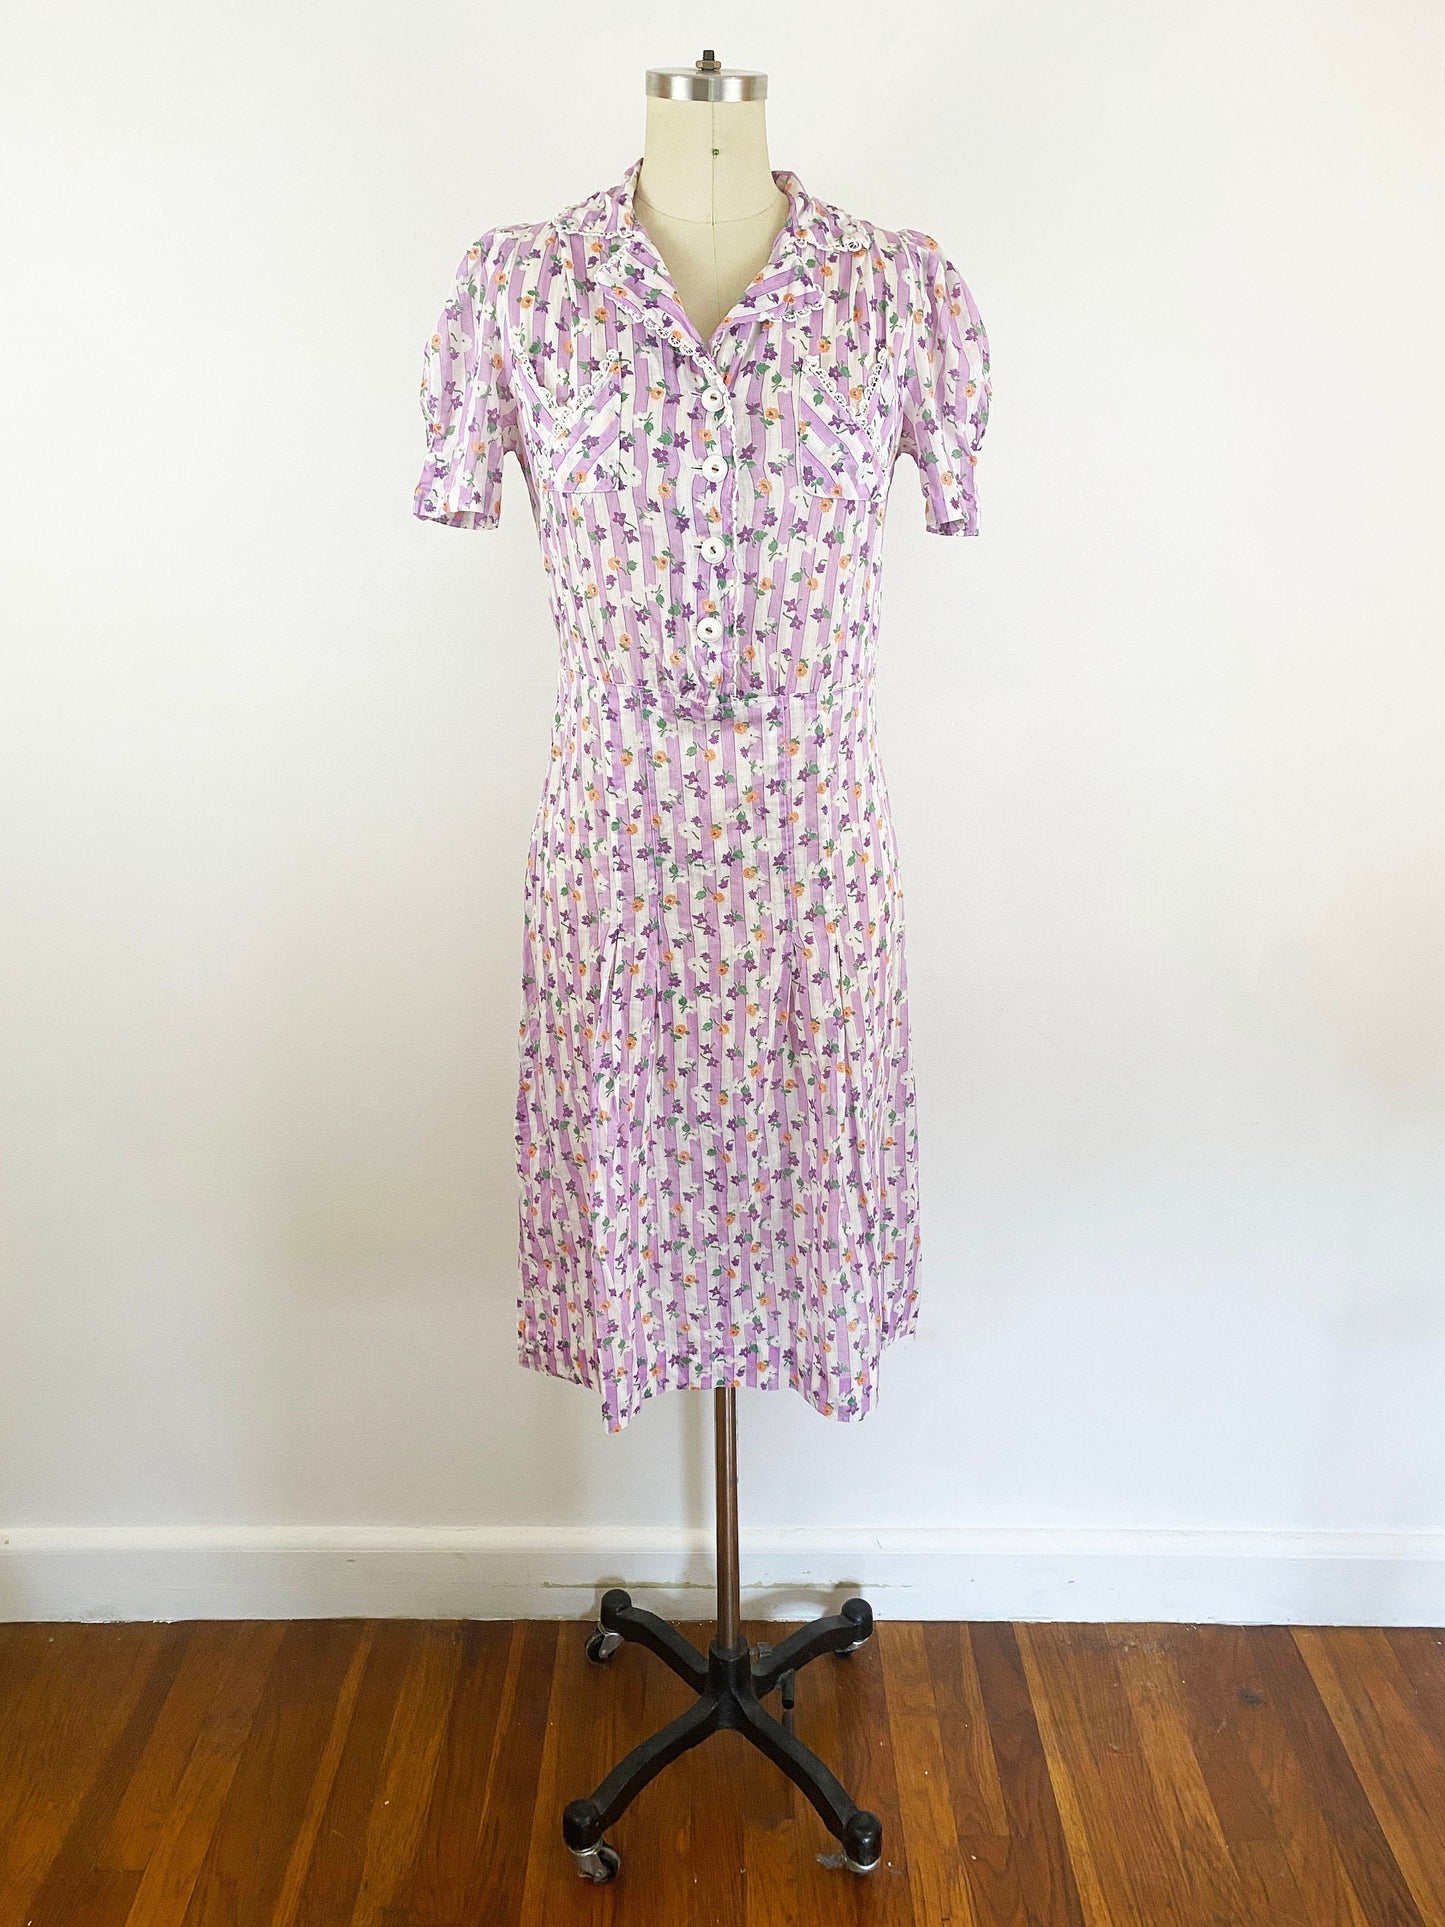 1930-1940s White and Purple Striped Floral Gauzy Cotton Day Dress Retro Chore Dress 30s 40s Cute Vintage Shirtwaist Feed Sack / Small 4/6